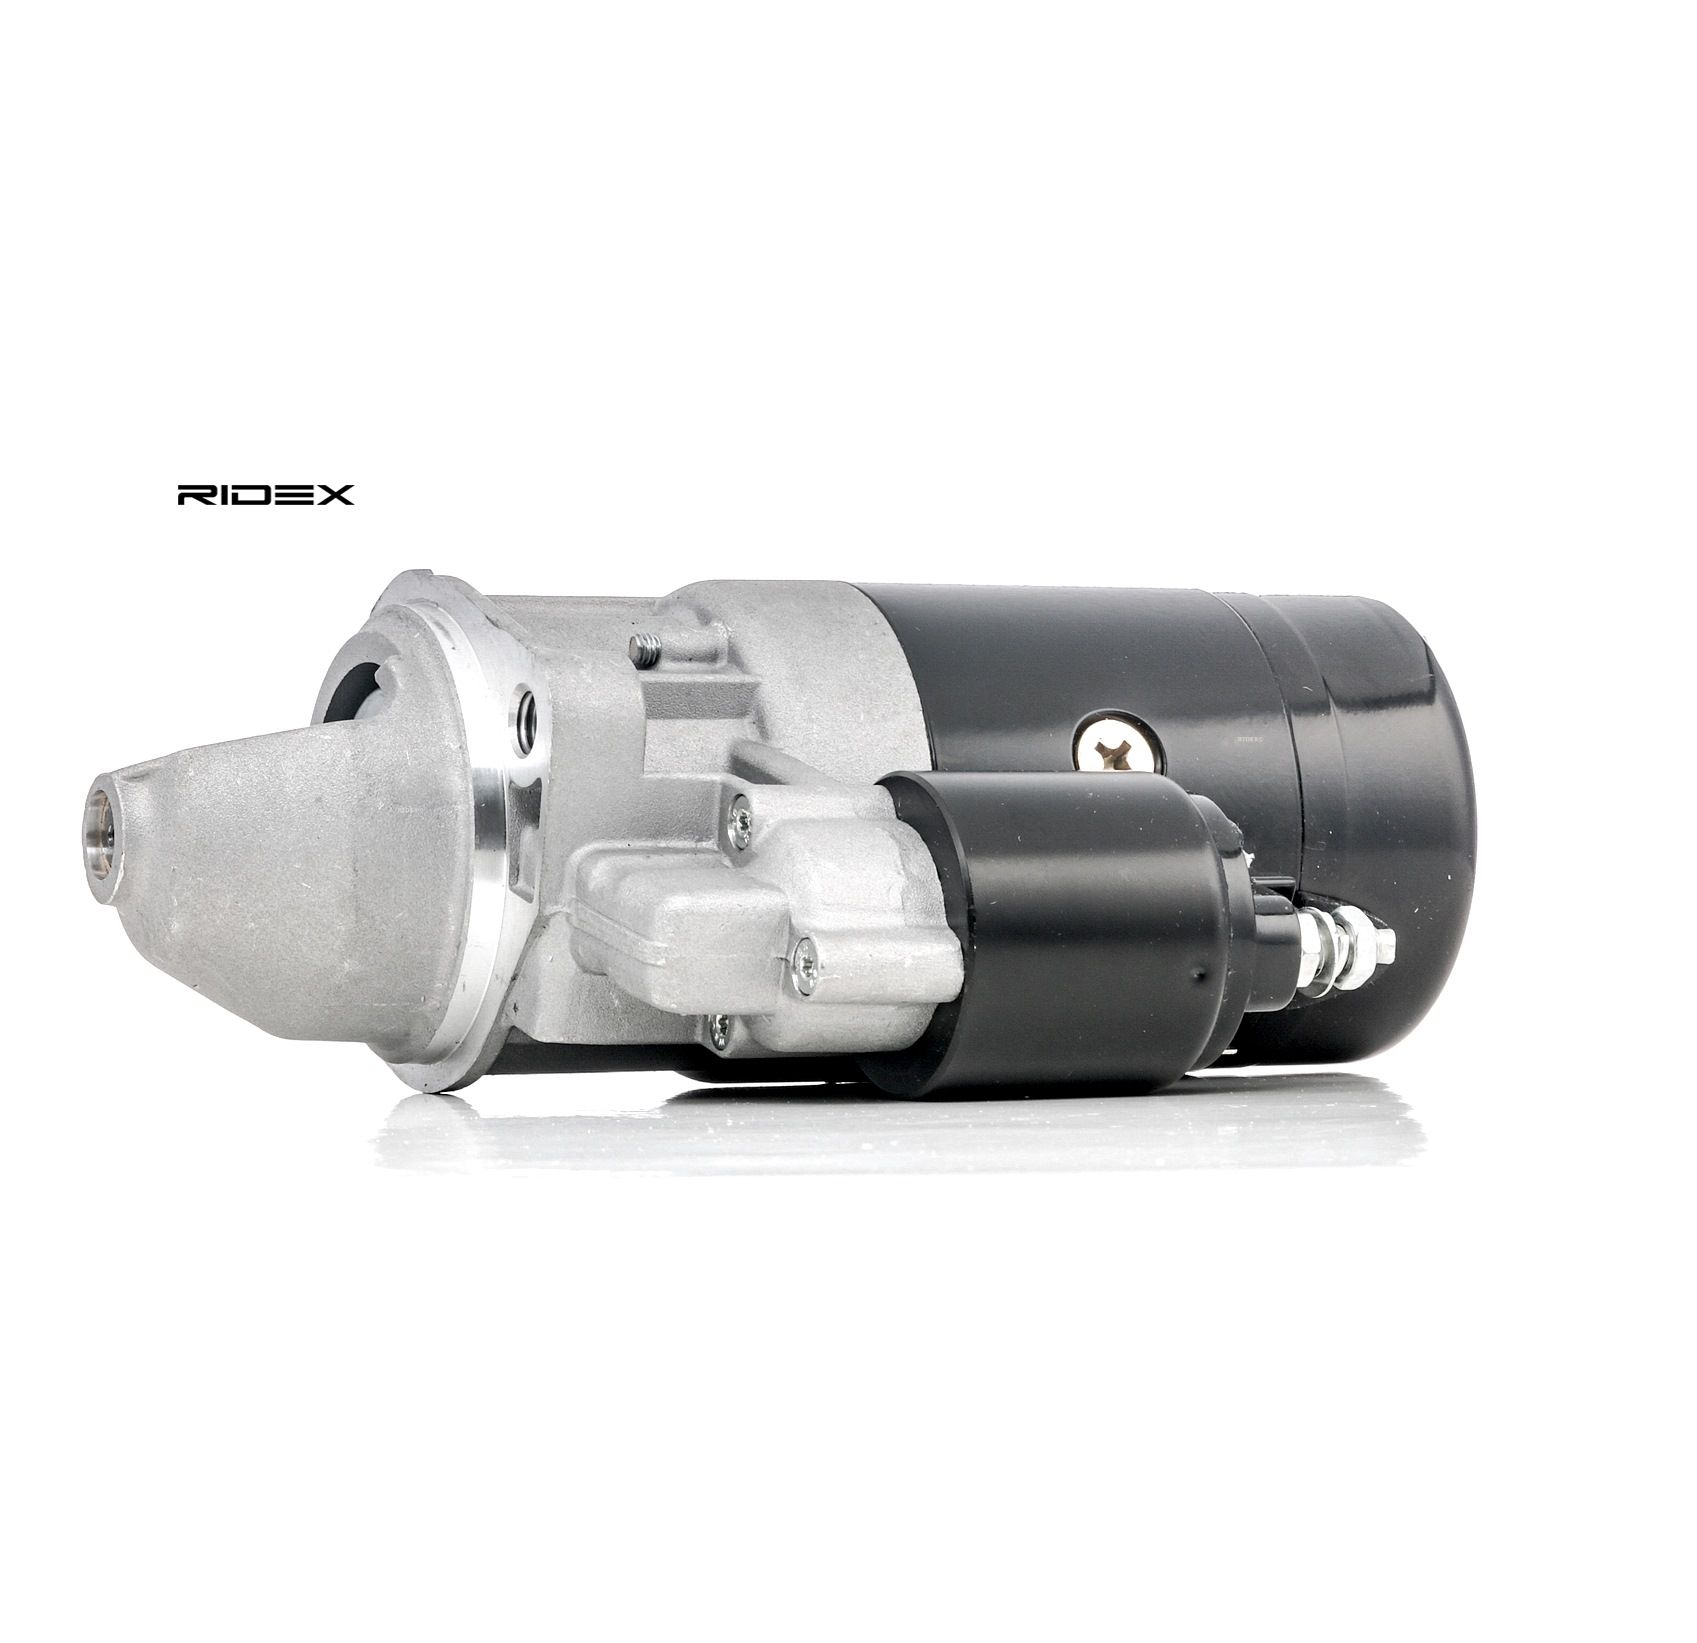 RIDEX 2S0110 Starter motor 12V, 2,2kW, with 50(Jet) clamp, NO